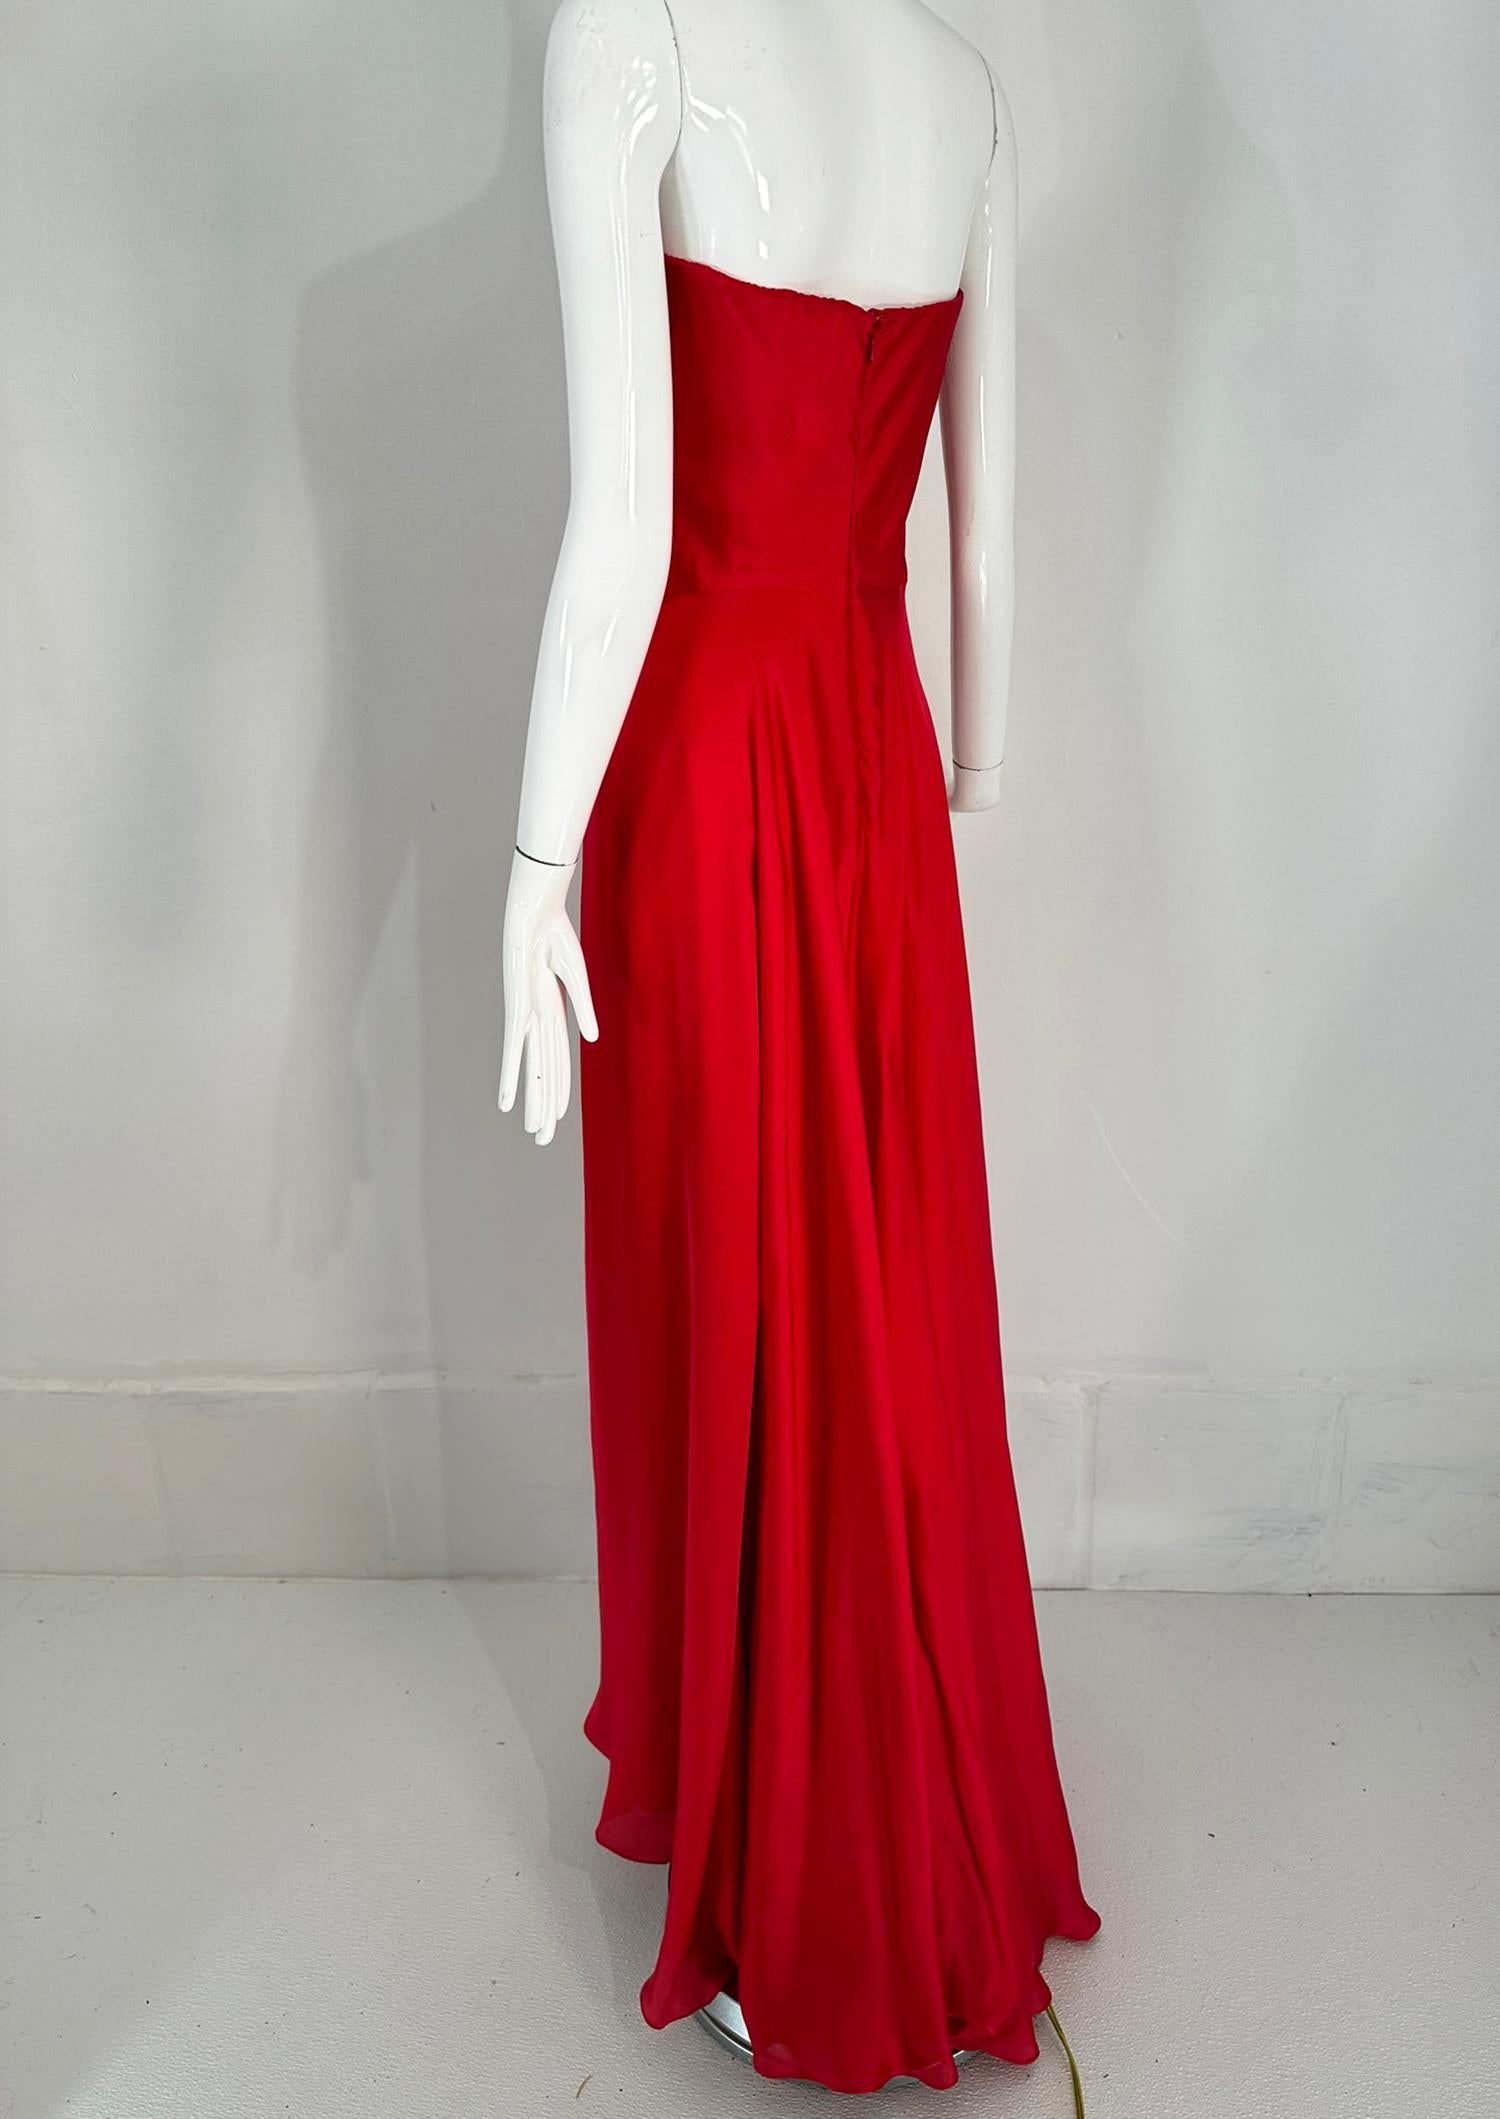 Ralph Lauren Collection Draped Red Silk Strapless Evening Gown 6 For Sale 2